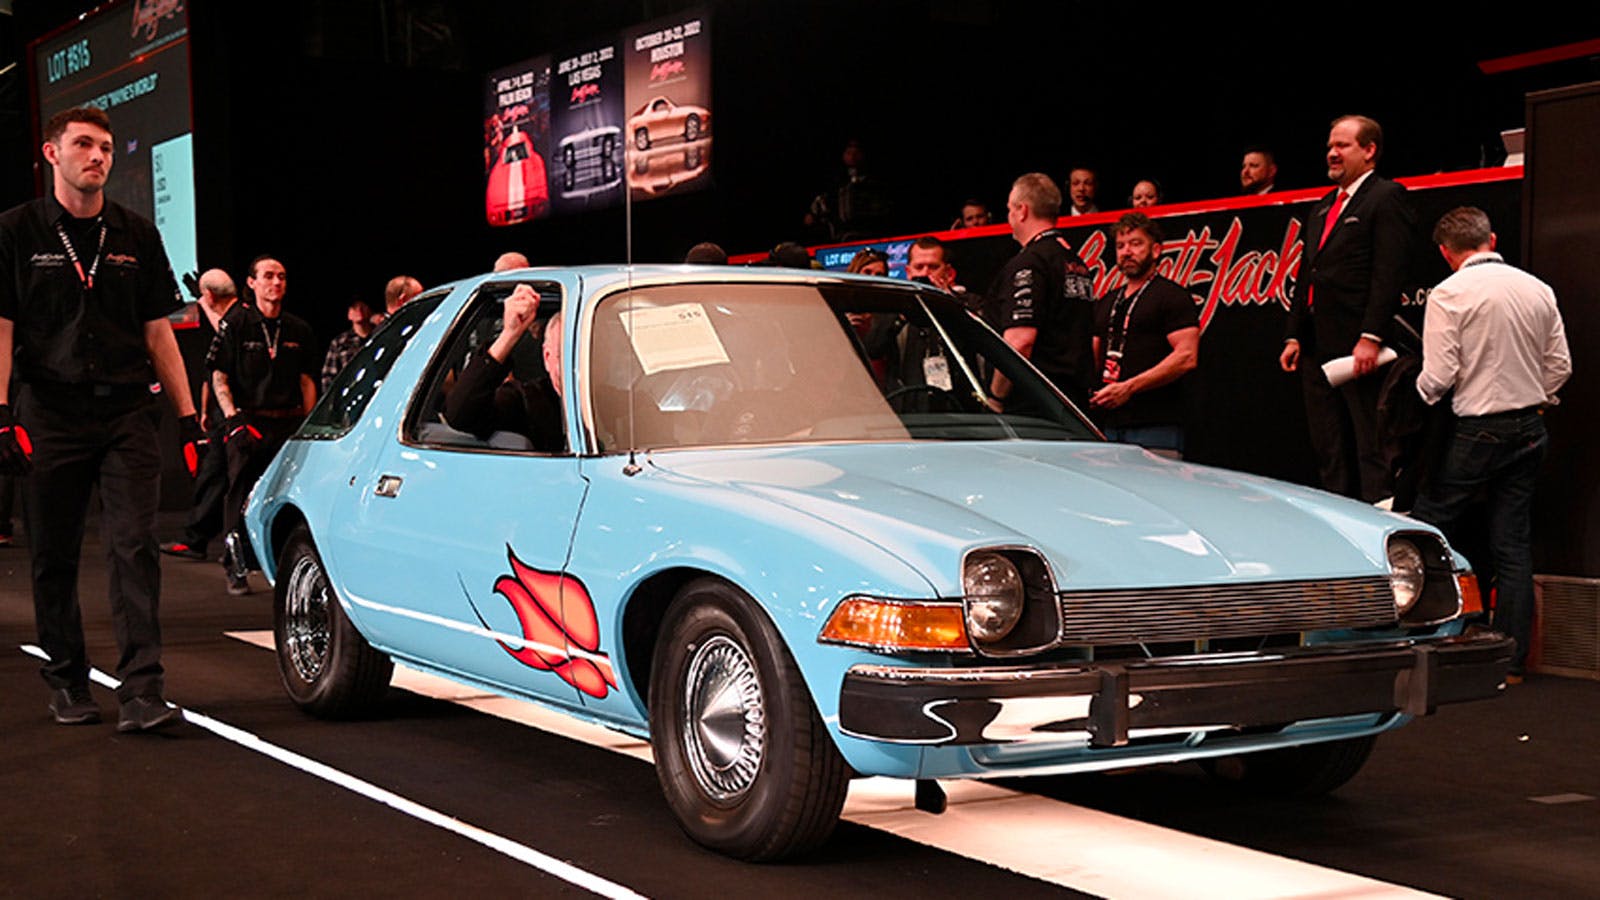 Wayne's World Pacer crossing stage